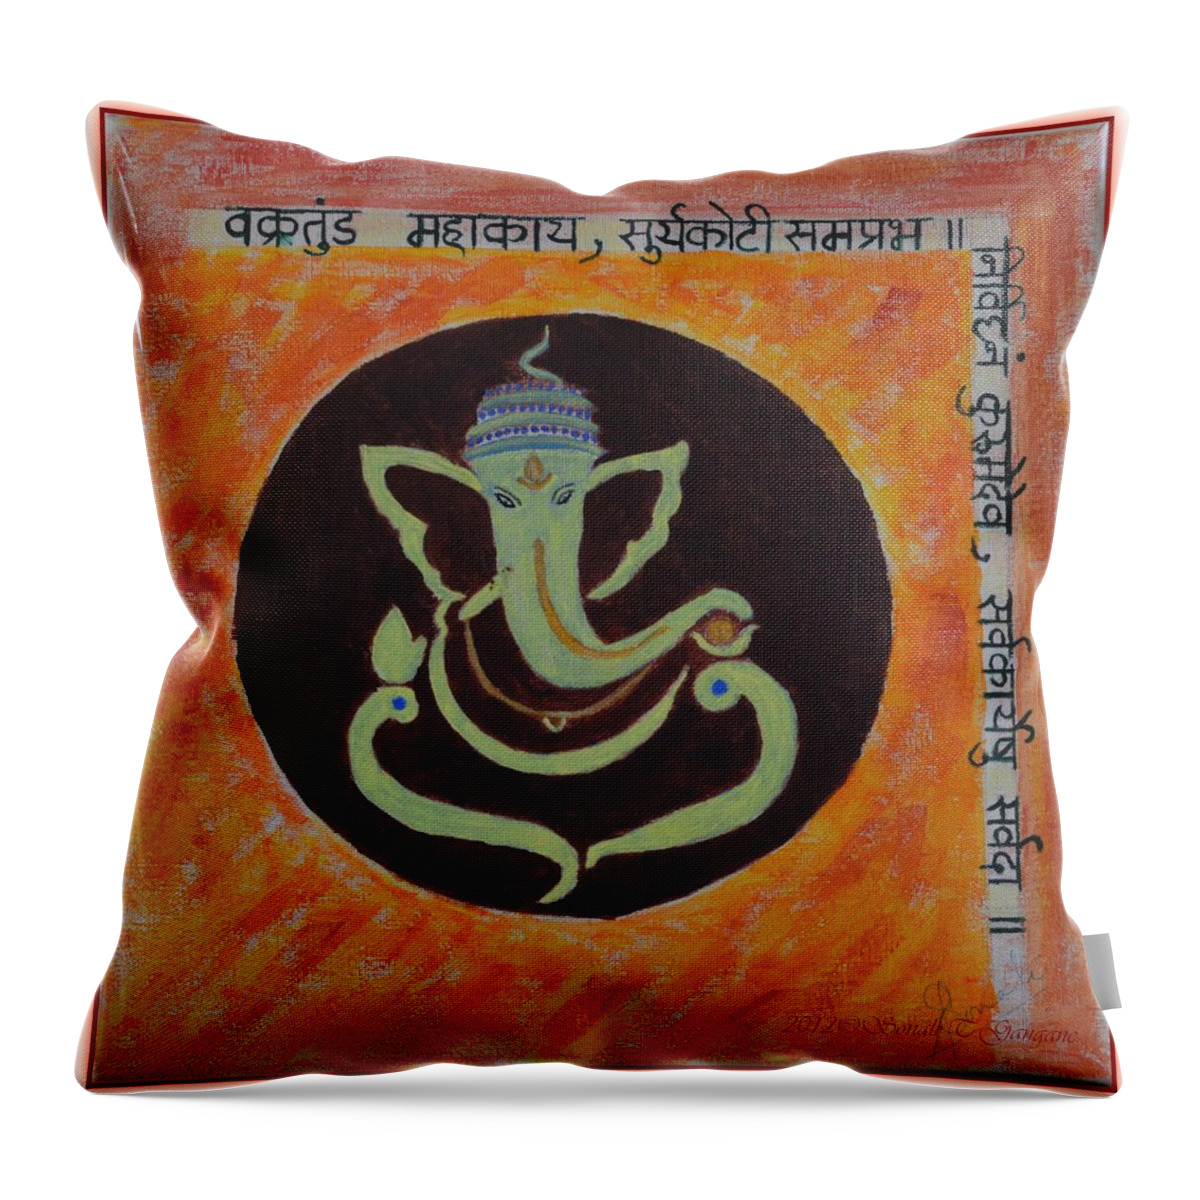 Blessings From Lord Ganesha Throw Pillow featuring the painting Shri Ganeshay Namah by Sonali Gangane